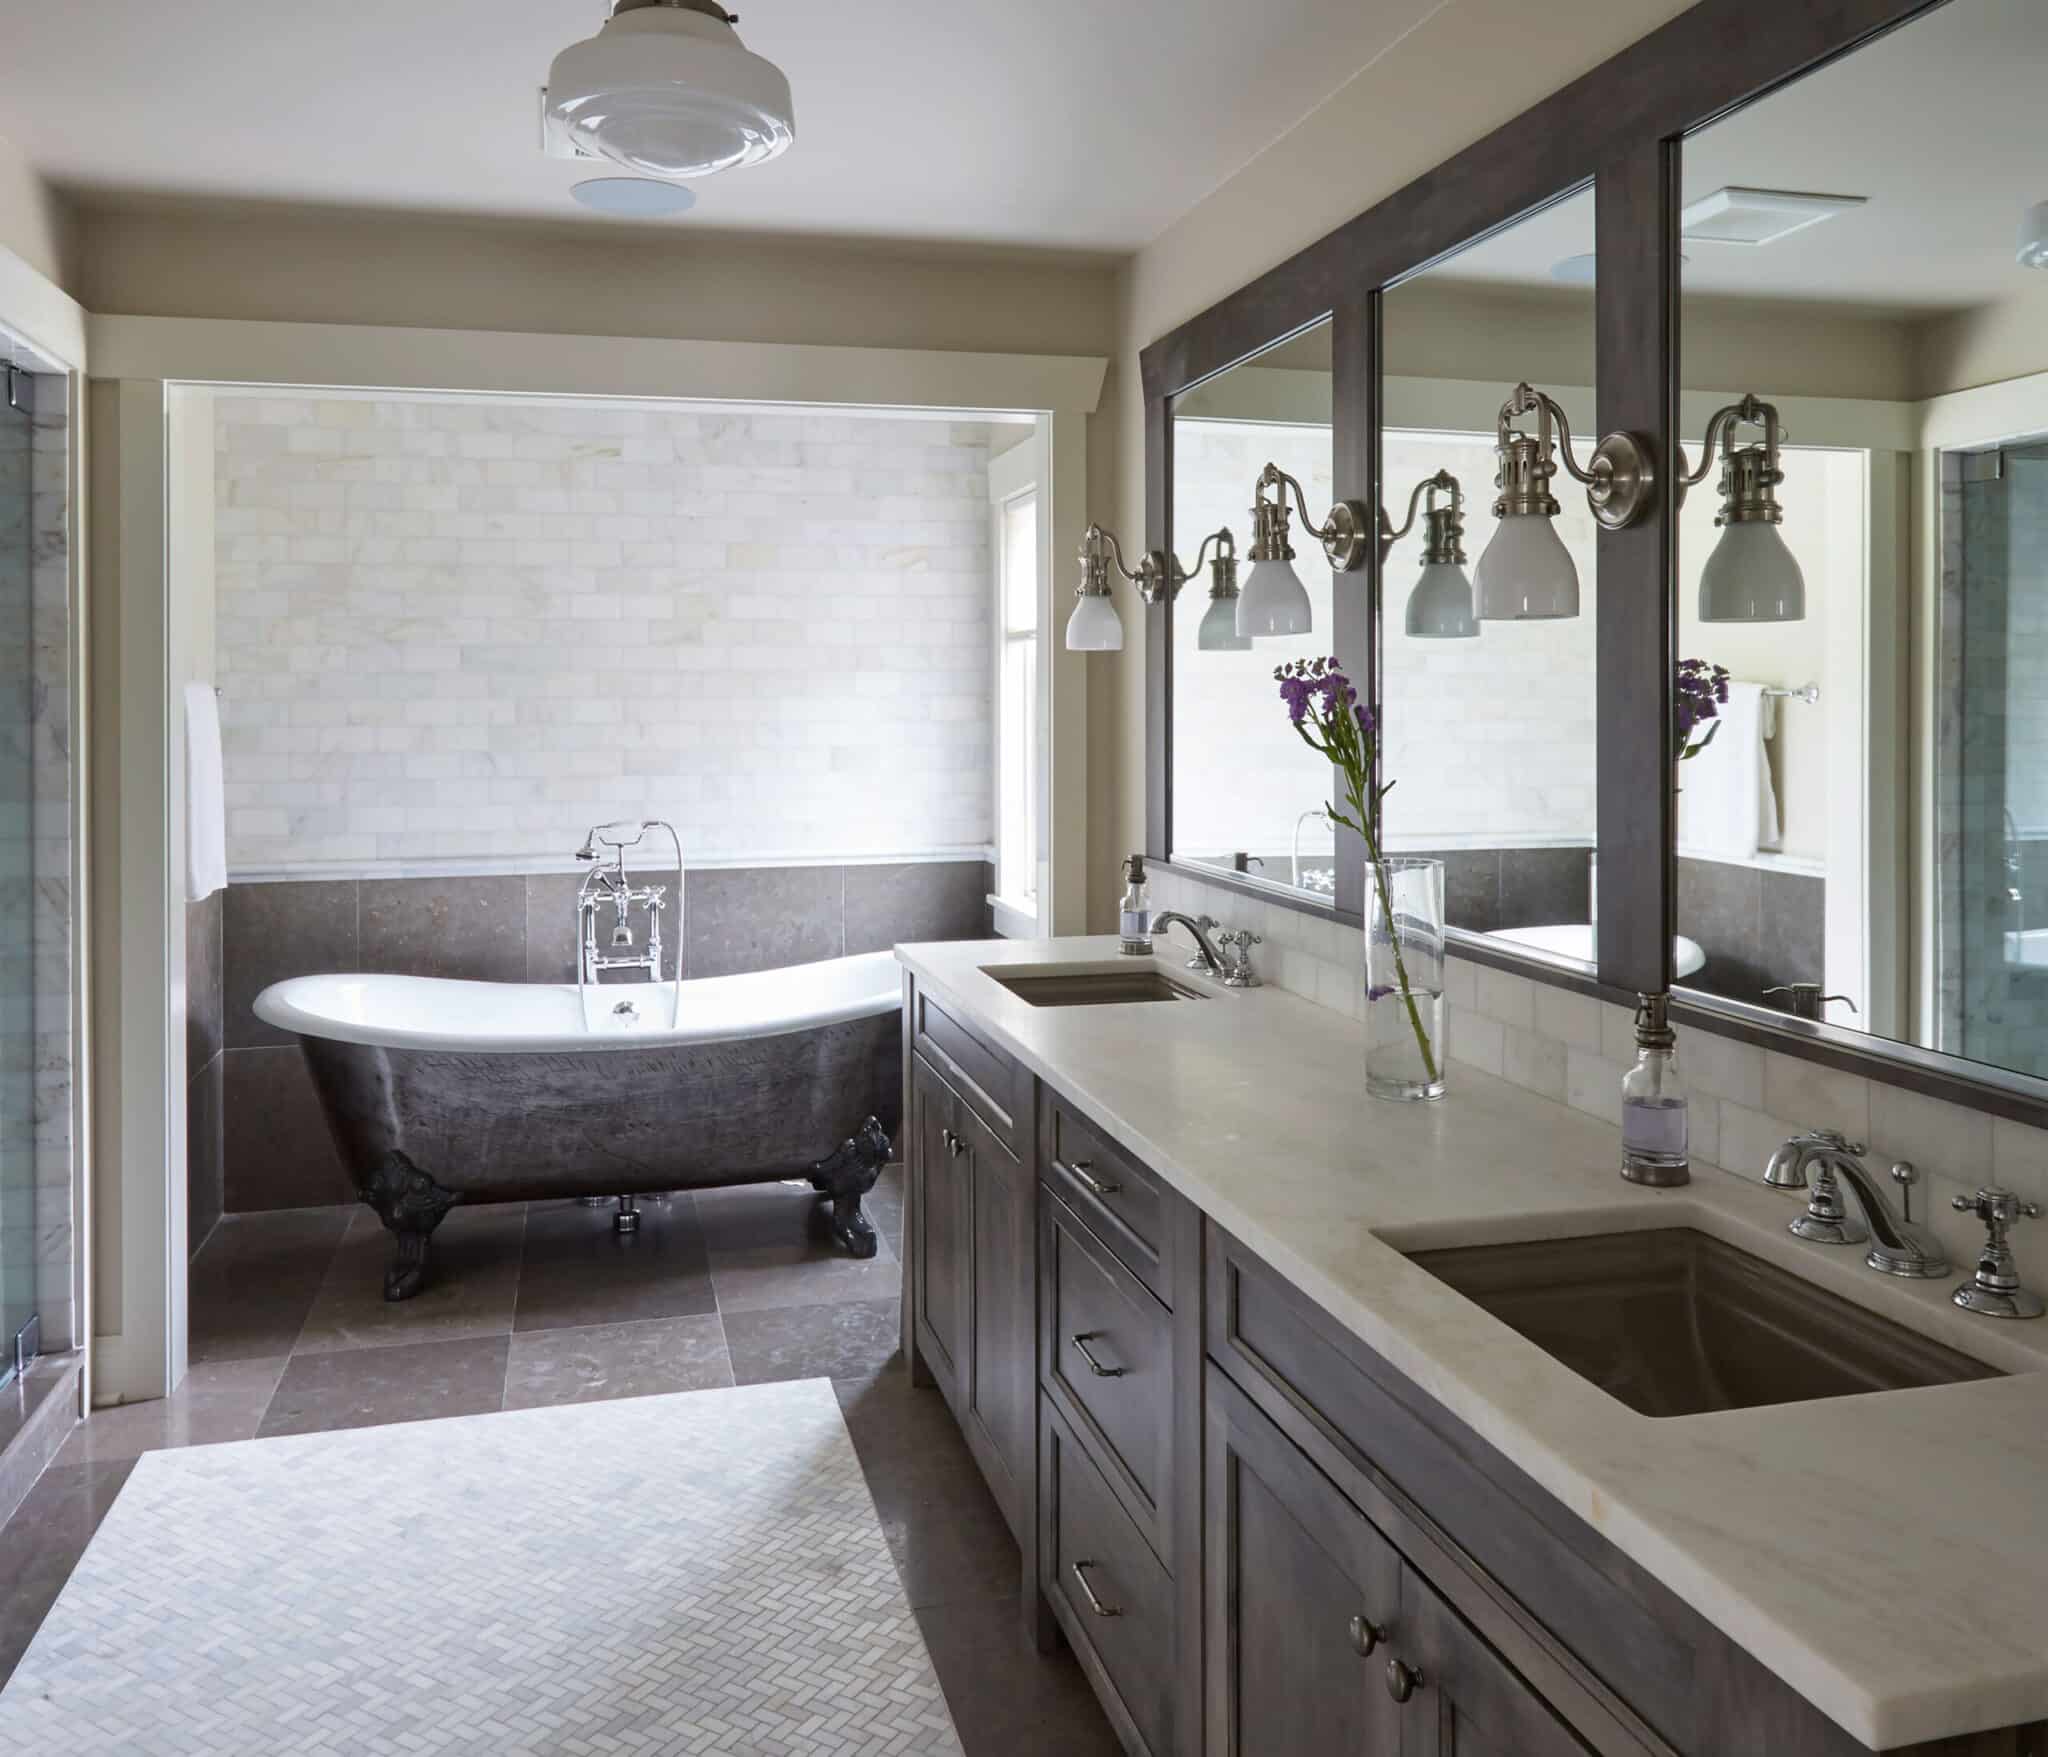 Traditional bathroom style with dark grey bathroom cabinet and white countertop